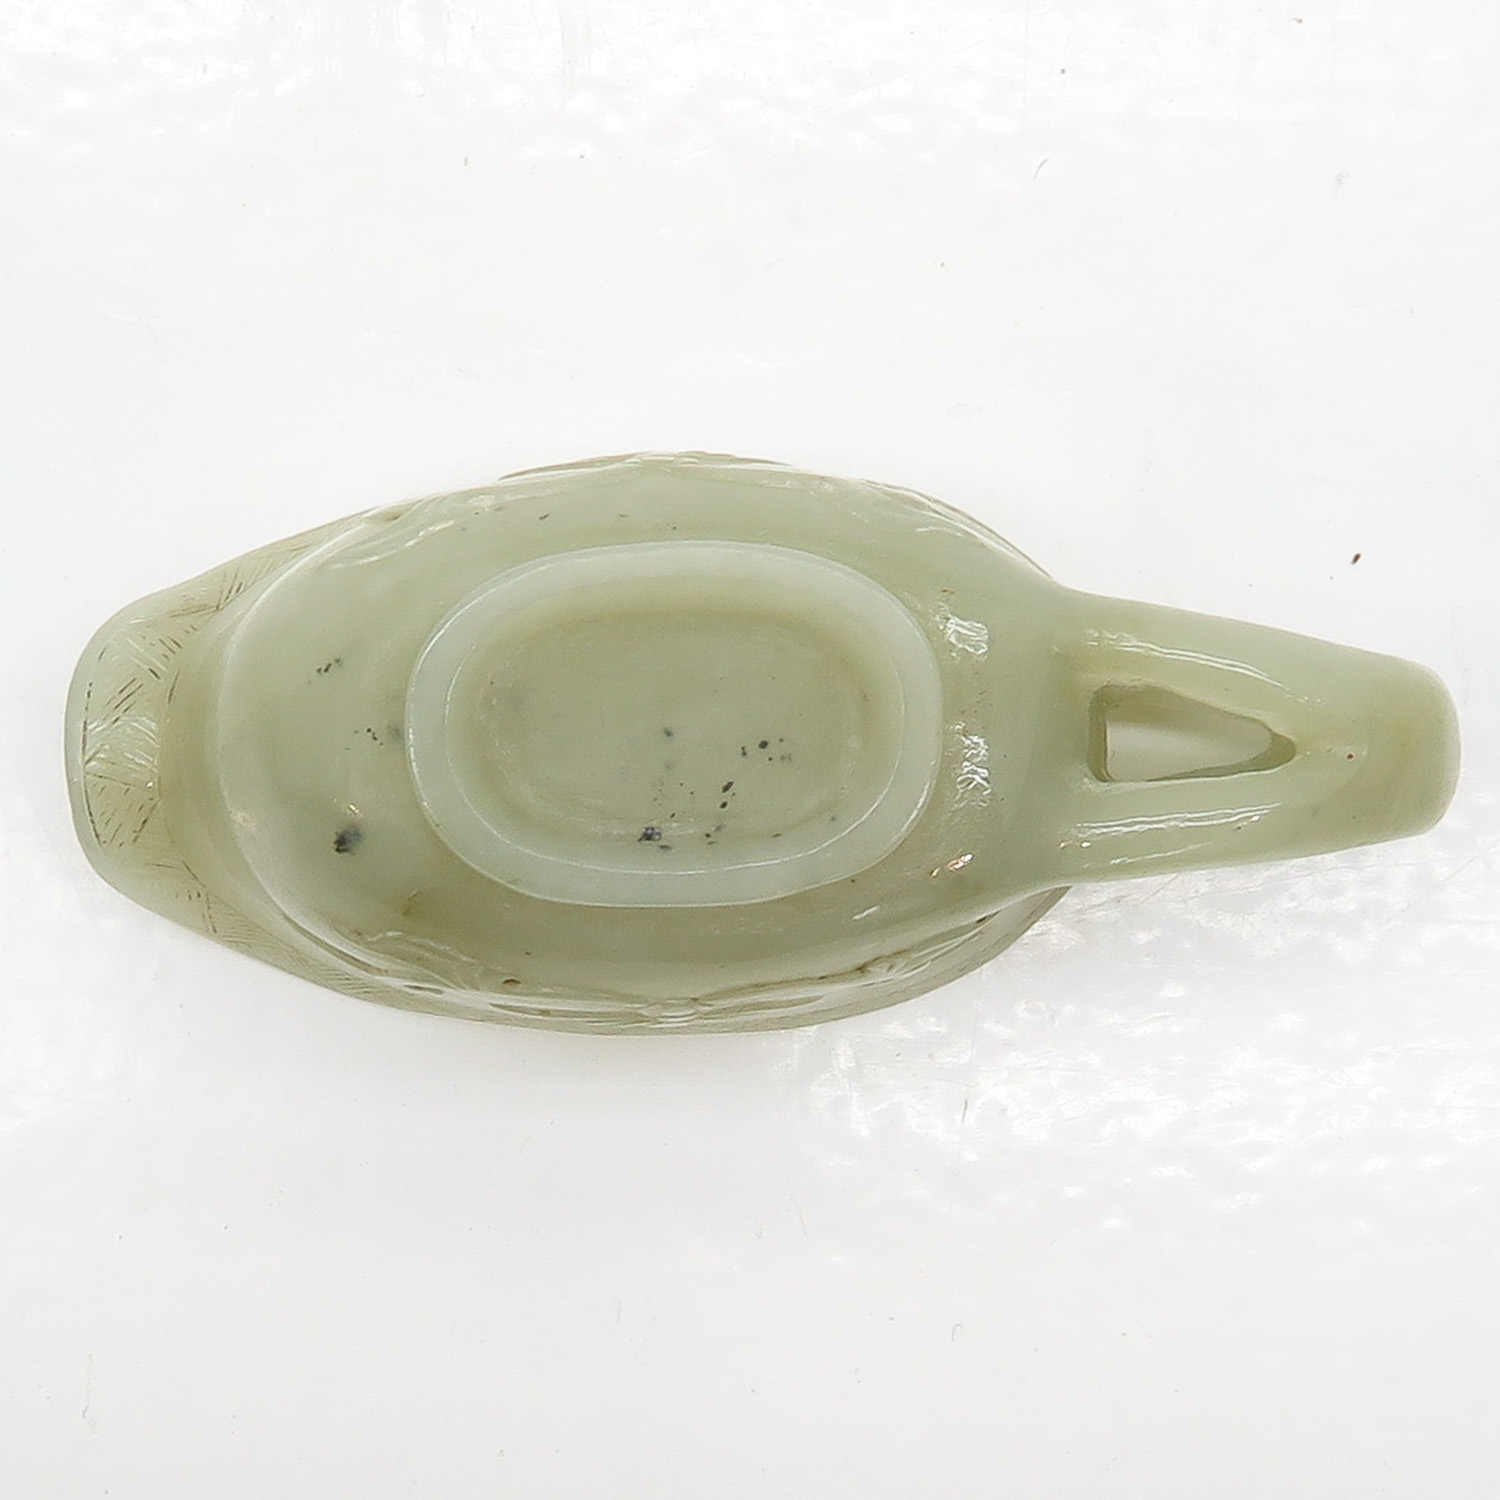 Small Carved Jade Pitcher - Image 6 of 6